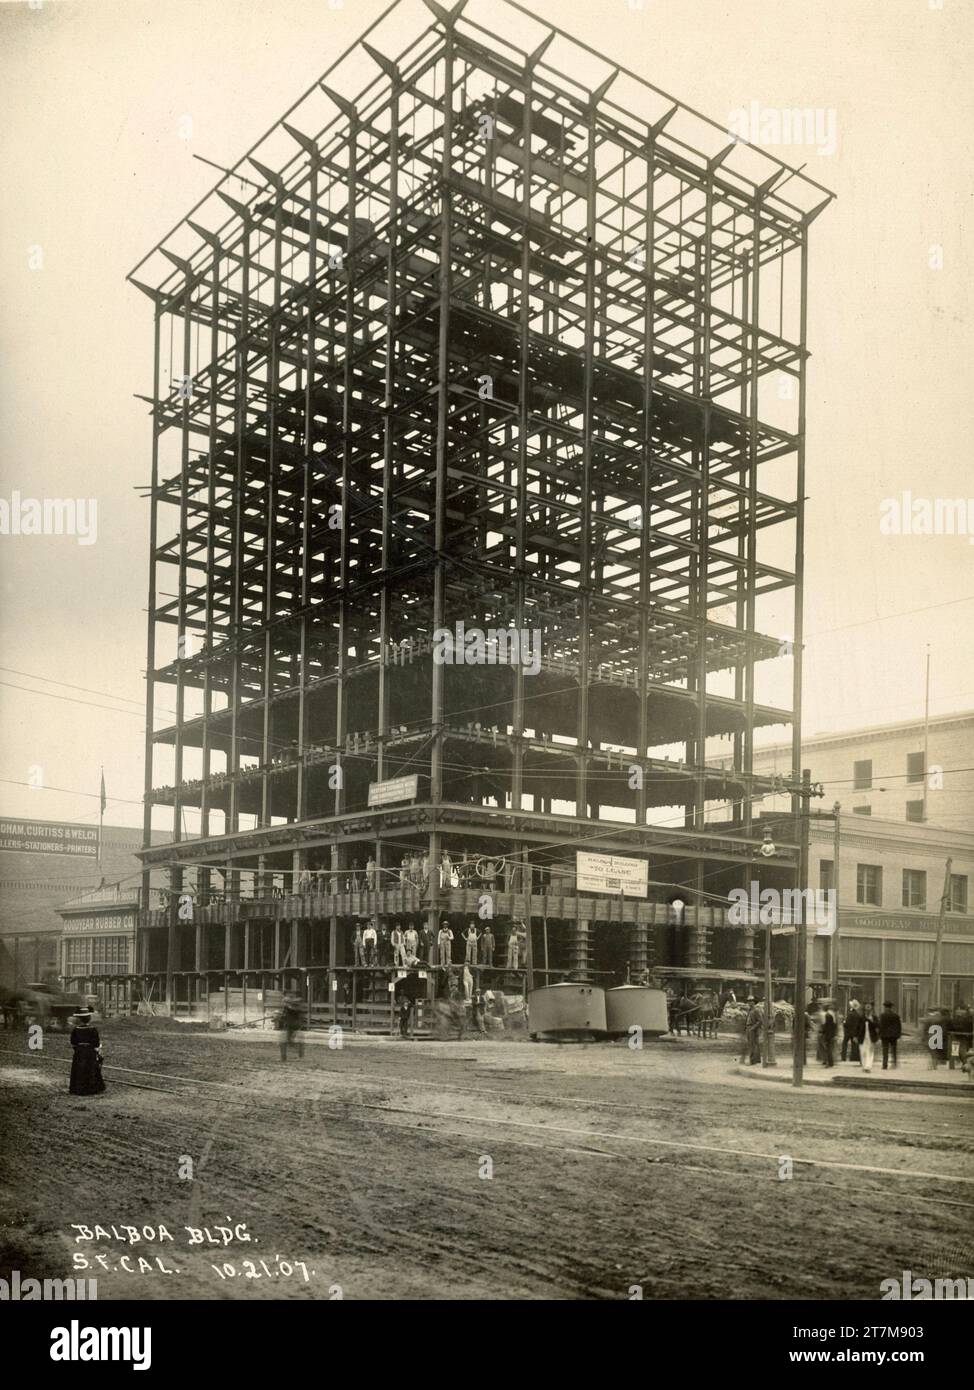 Architecture History 1900, Steel Framed Building, Early Skyscraper Stock Photo